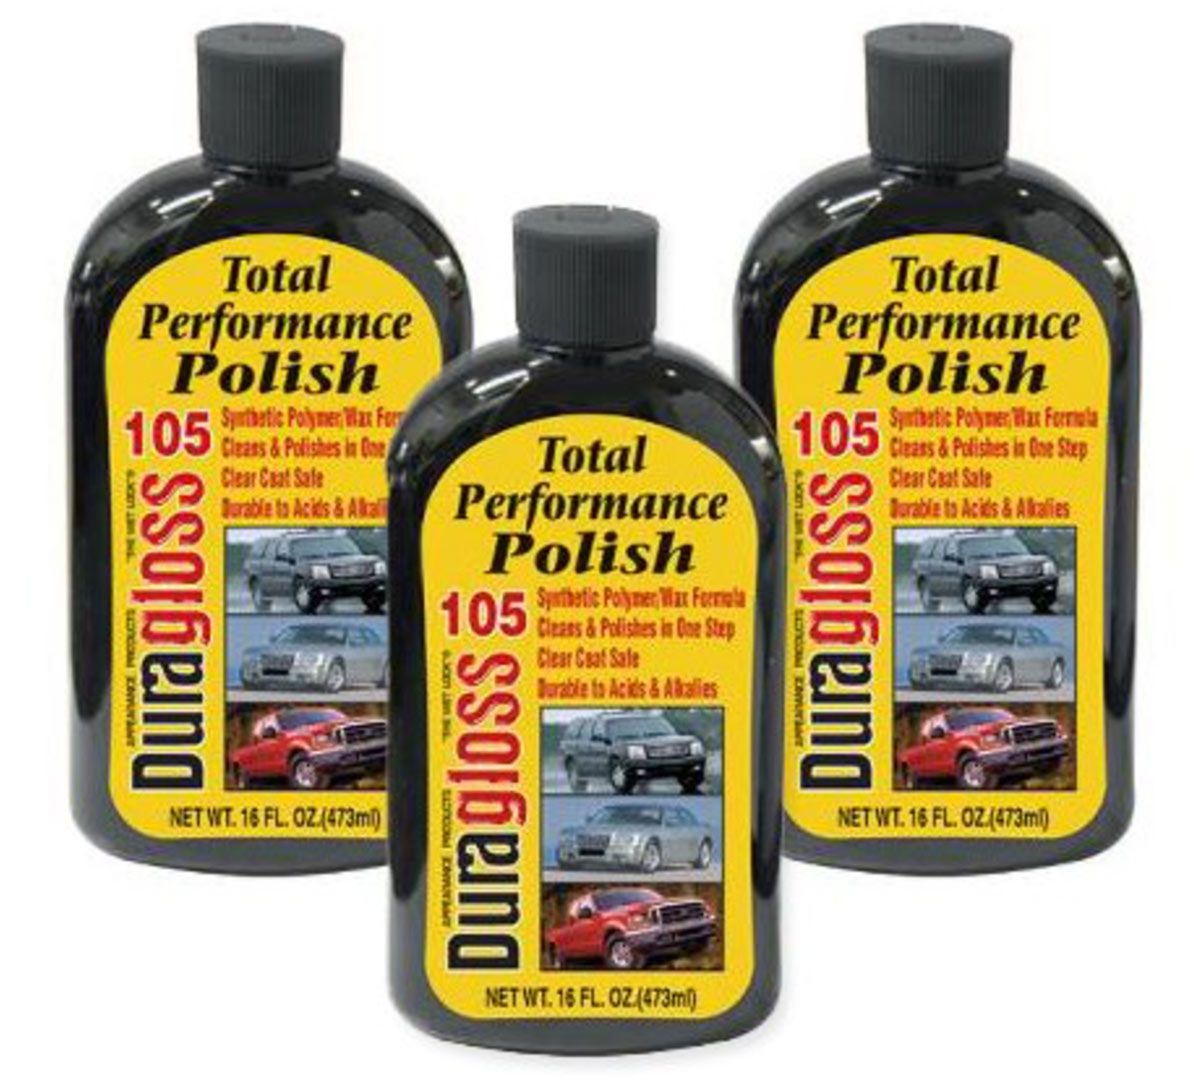 three containers of DuraGloss 105 Total Performance Polish on display